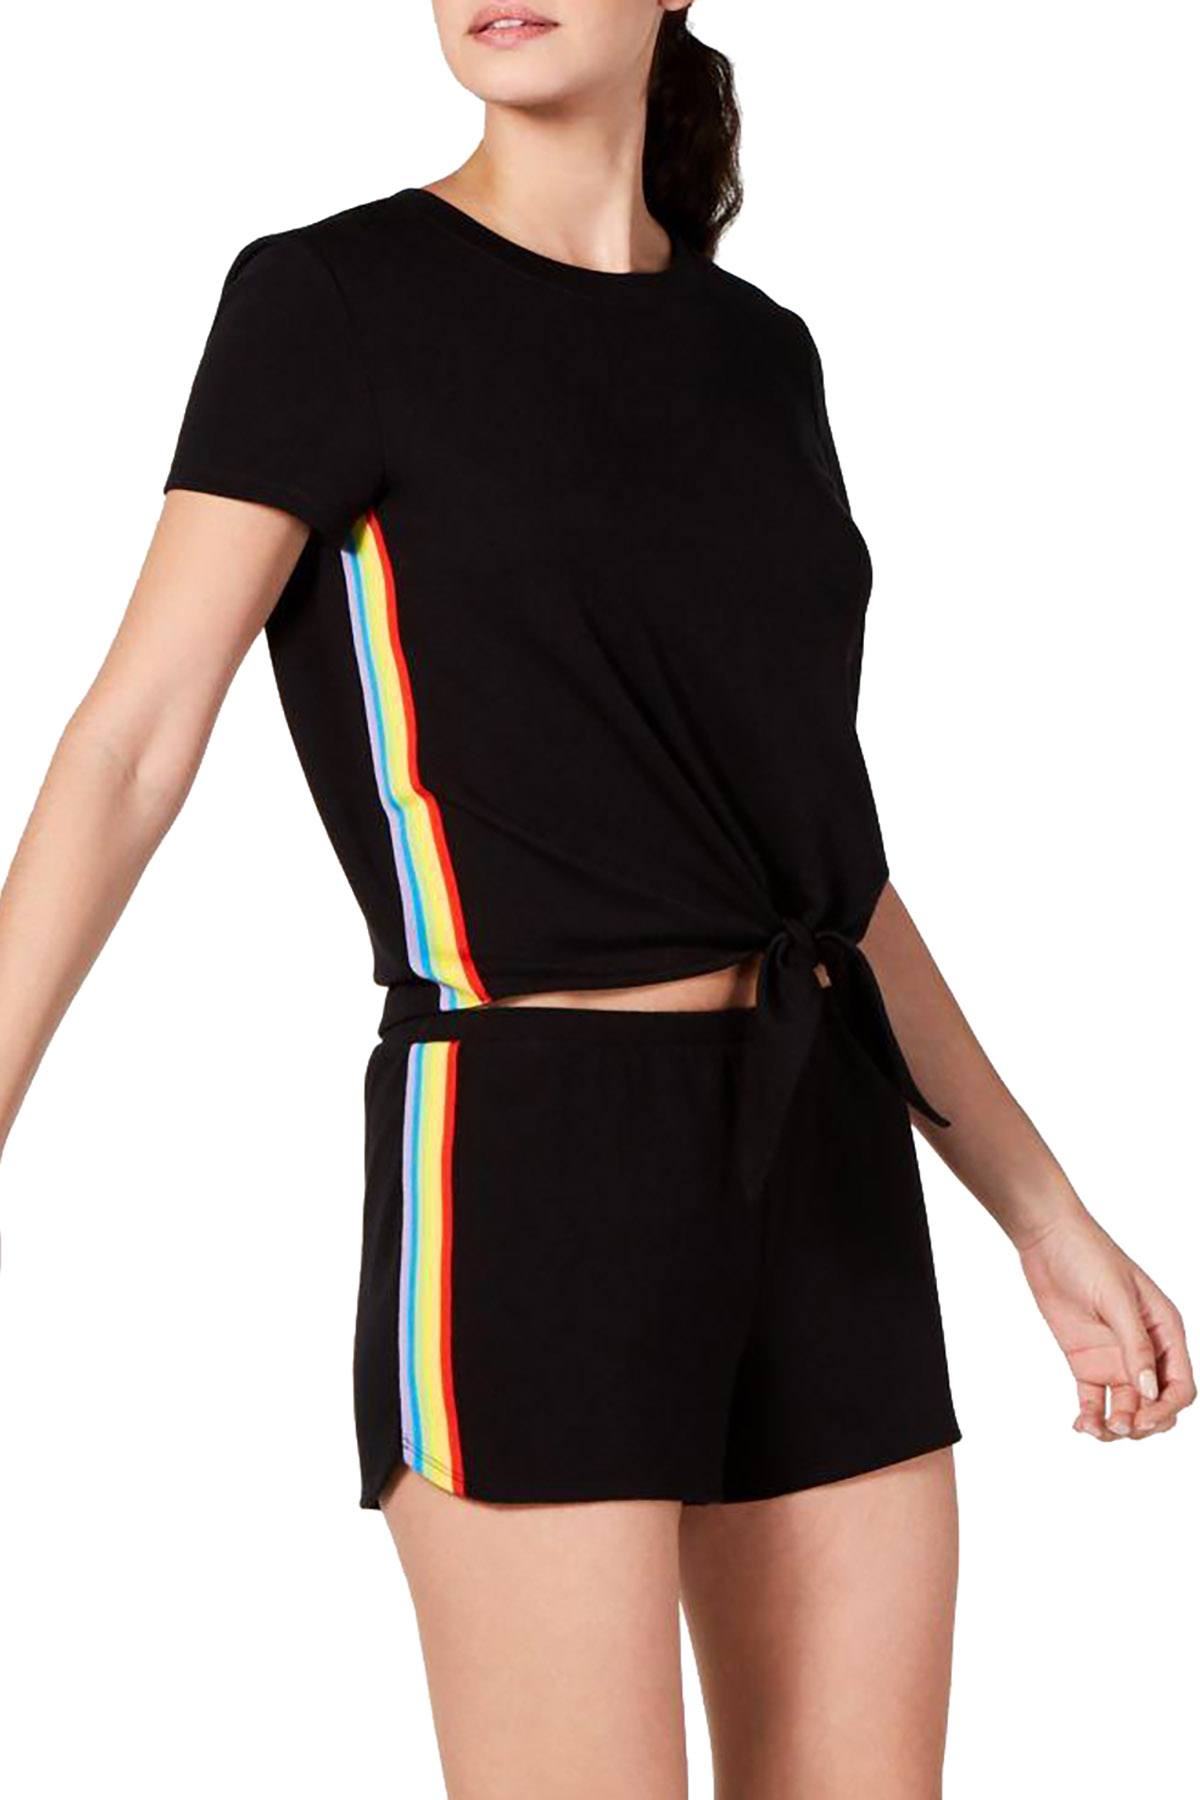 INC International Concepts Super Soft Rainbow Tie Front Top and Short Set in Black